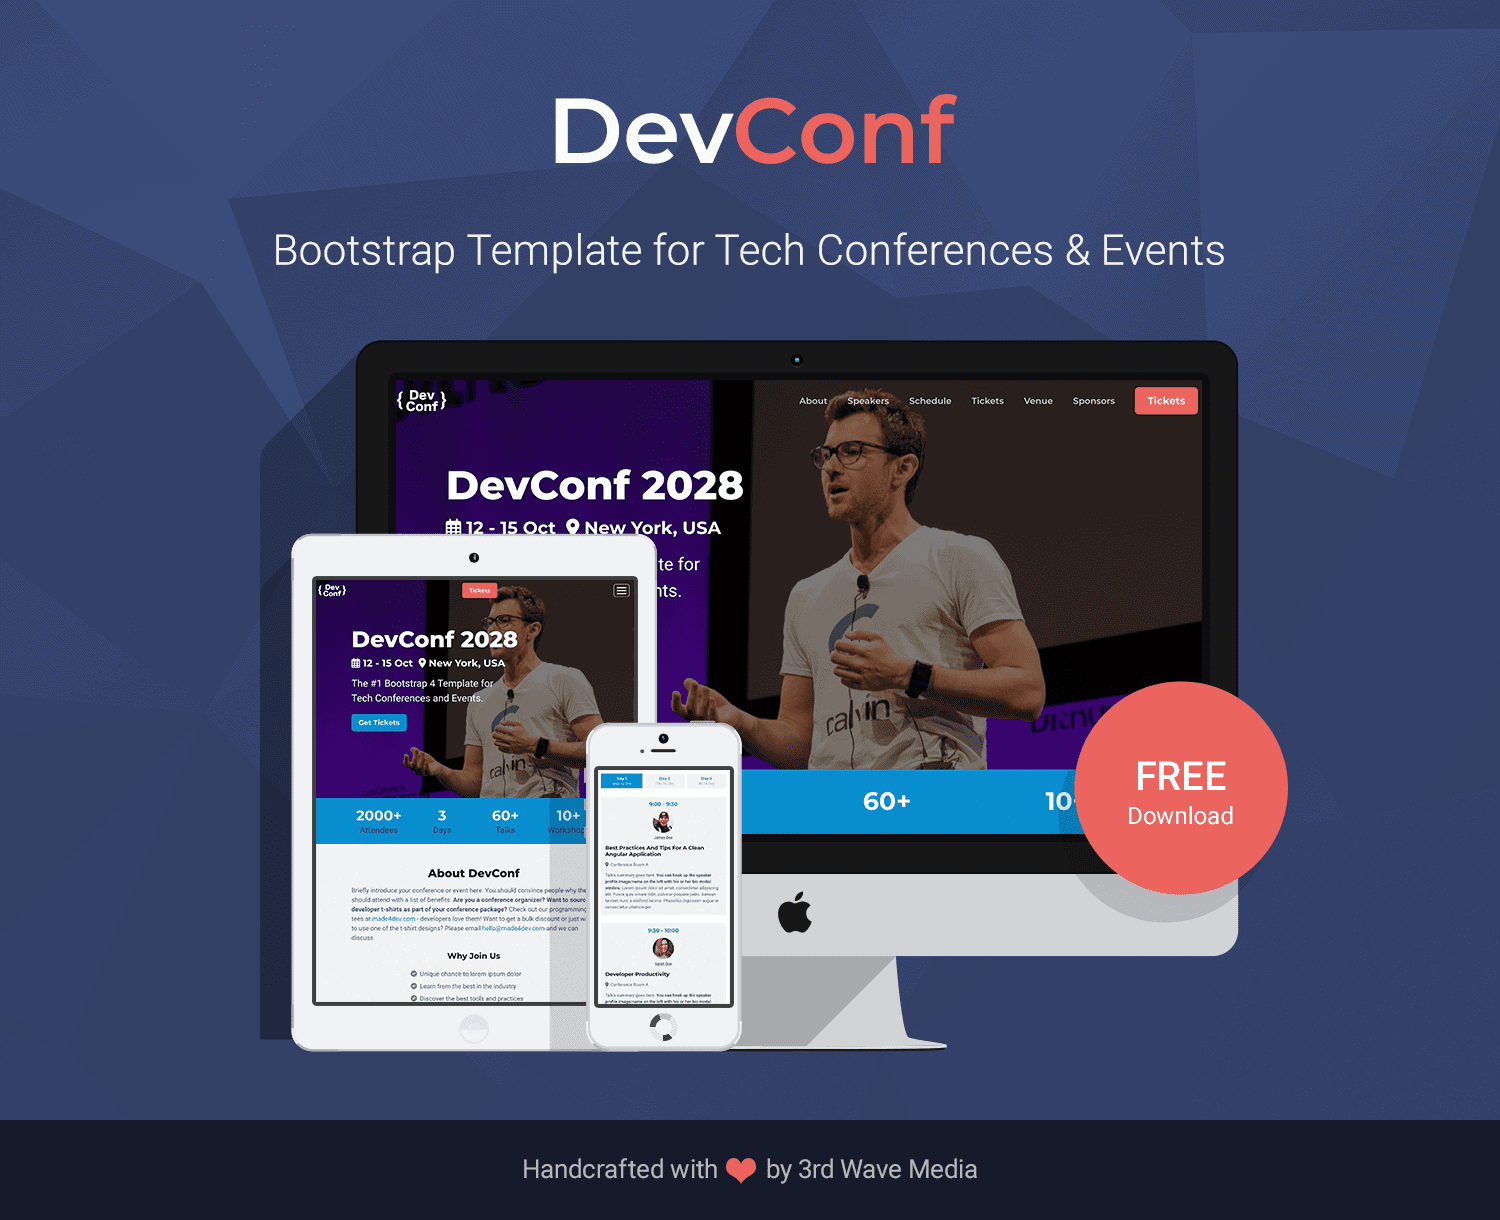 Bootstrap-Tech-Conference-Template-DevConf-Gumroad-Pormo